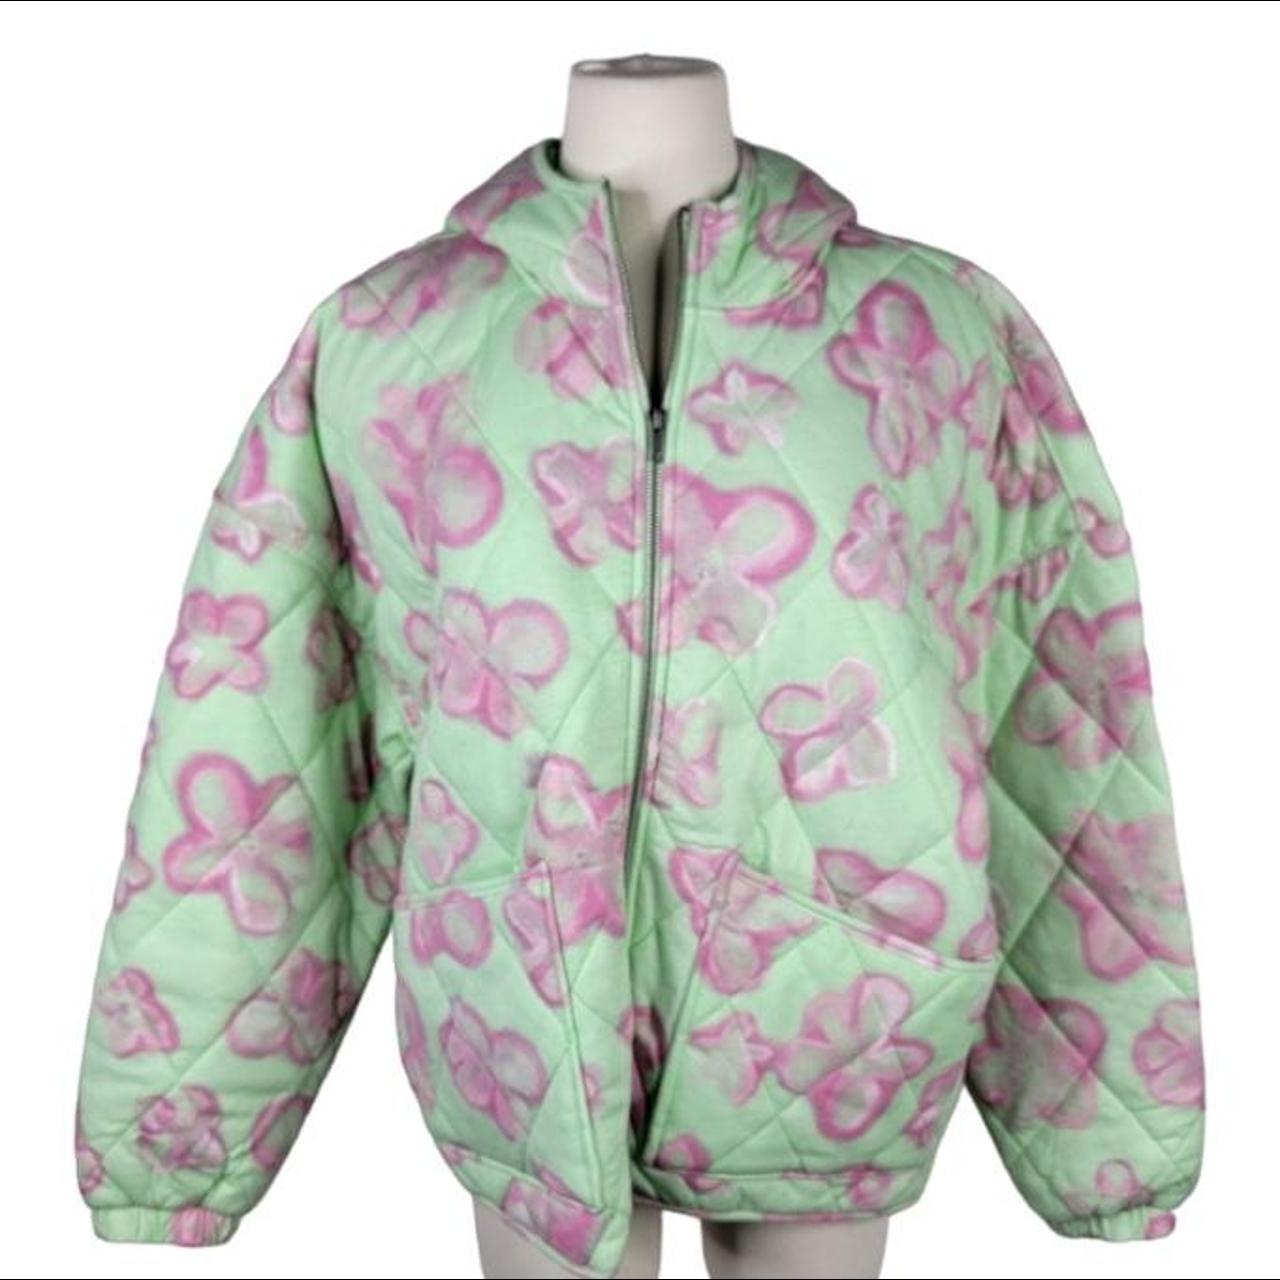 Wild Fable Women's Green and Pink Jacket